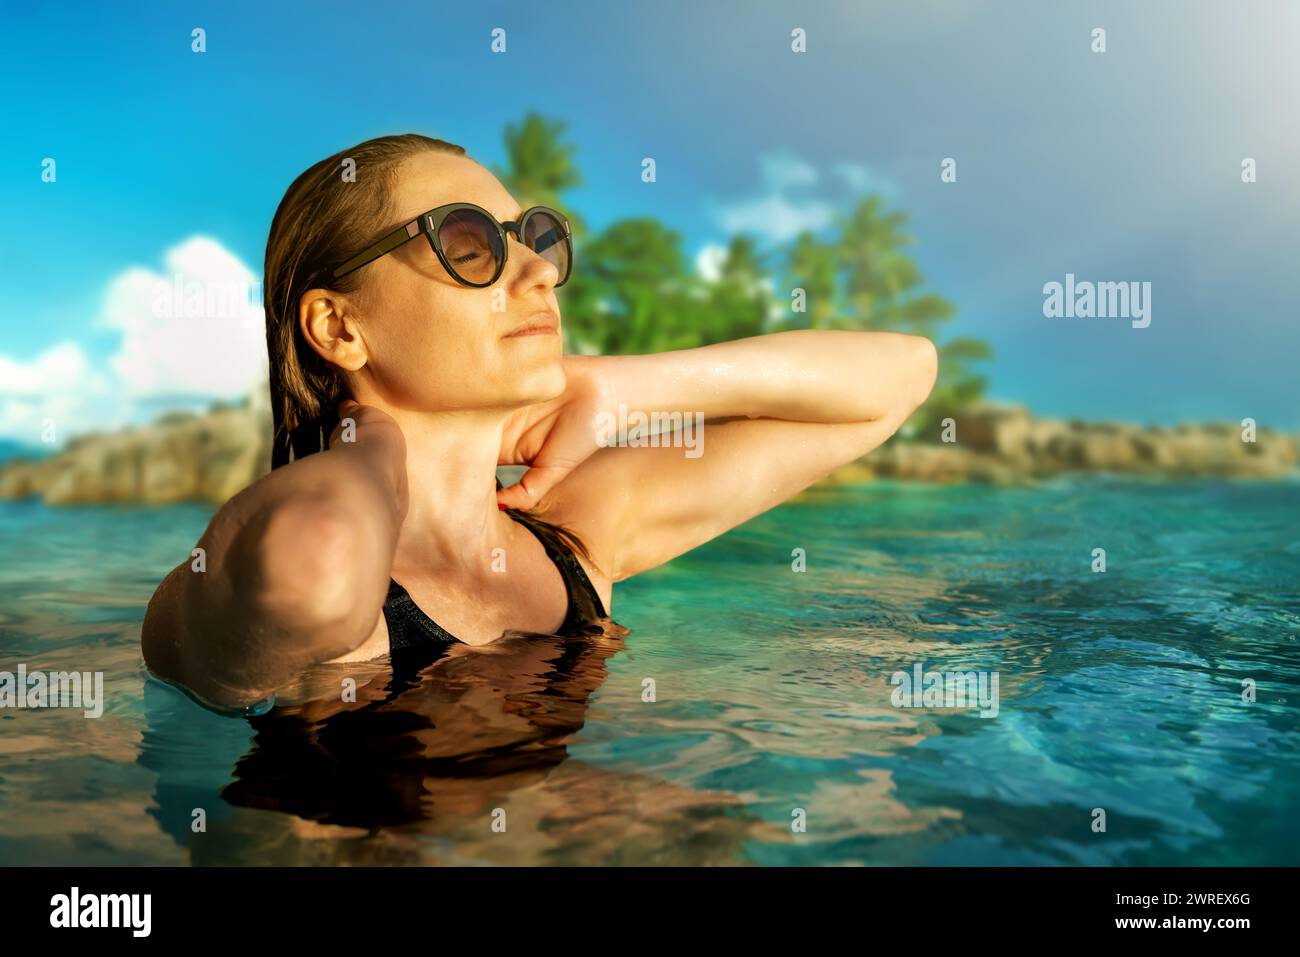 woman with sunglasses enjoying vacations and sunlight on face in ocean at tropical Seychelles islands Stock Photo